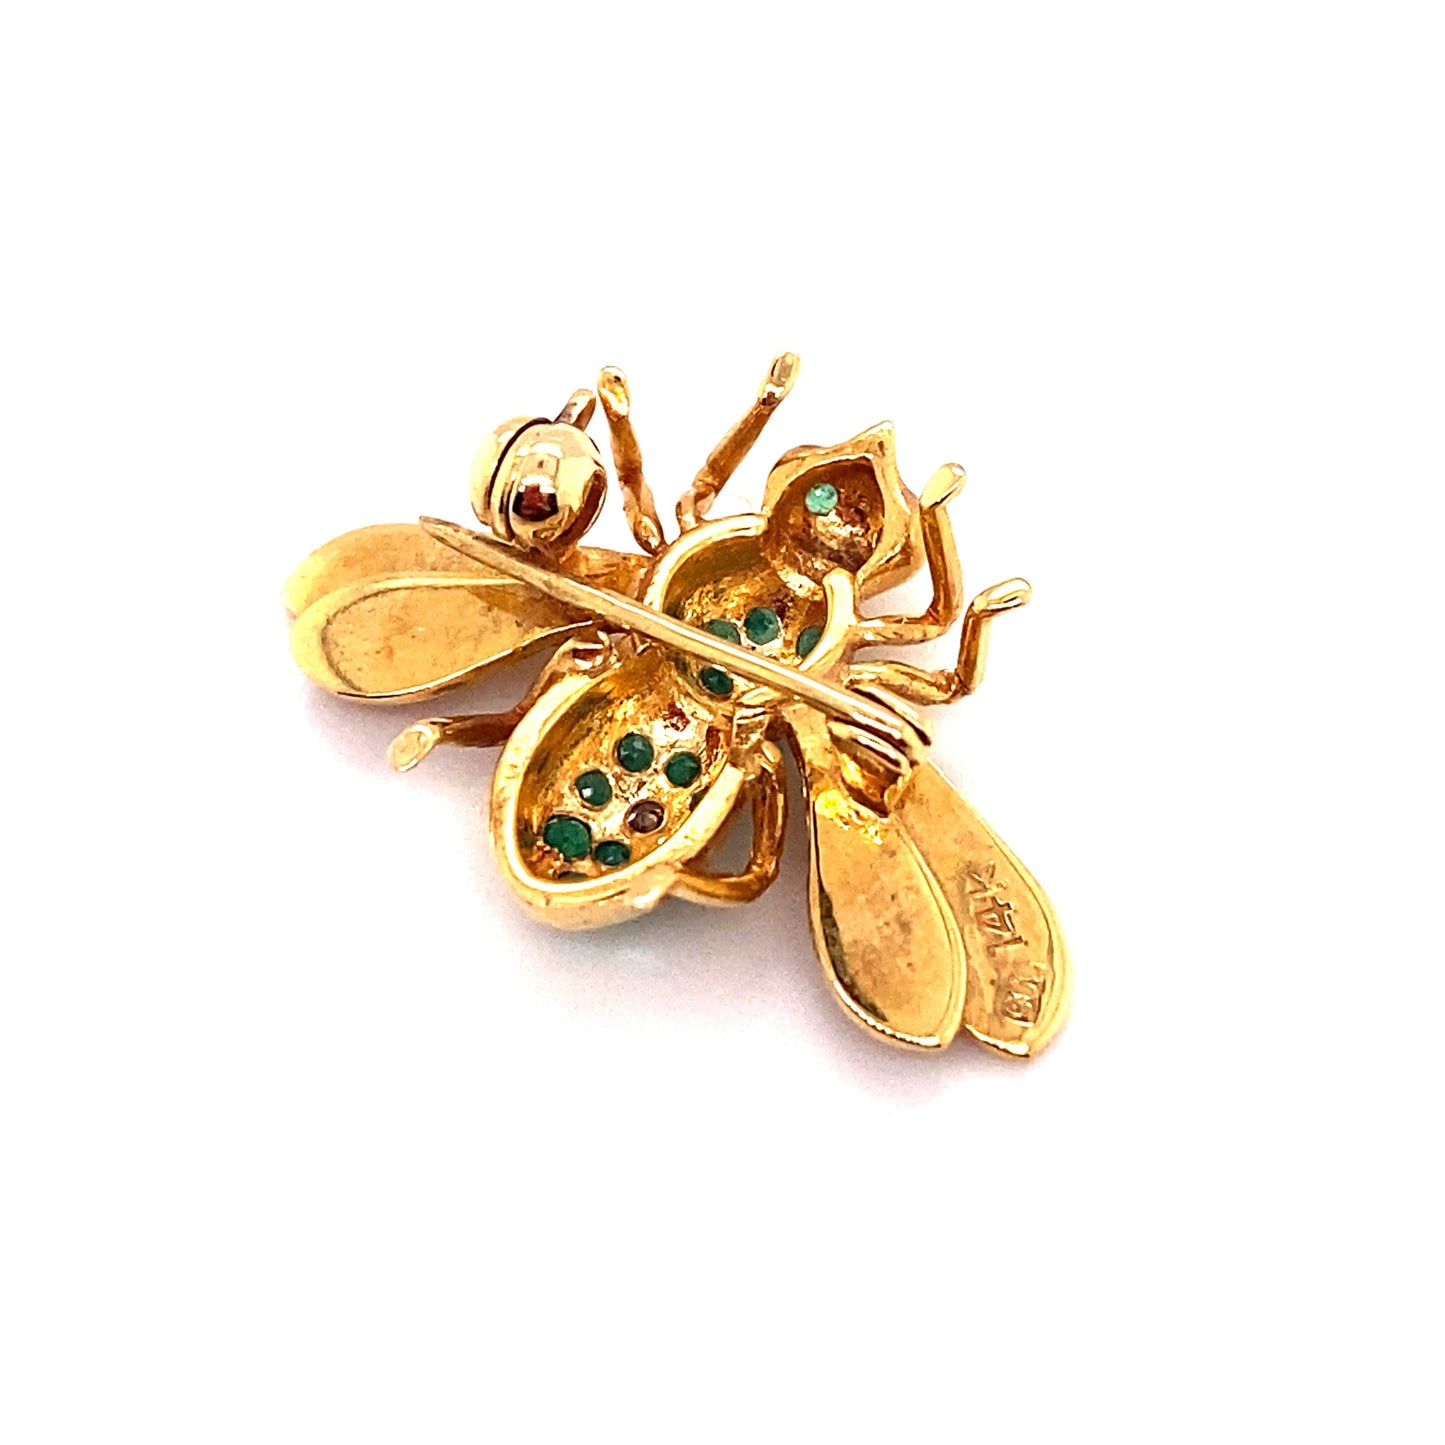 Circa 1960s Emerald and Diamond Insect Pin in 14K Gold